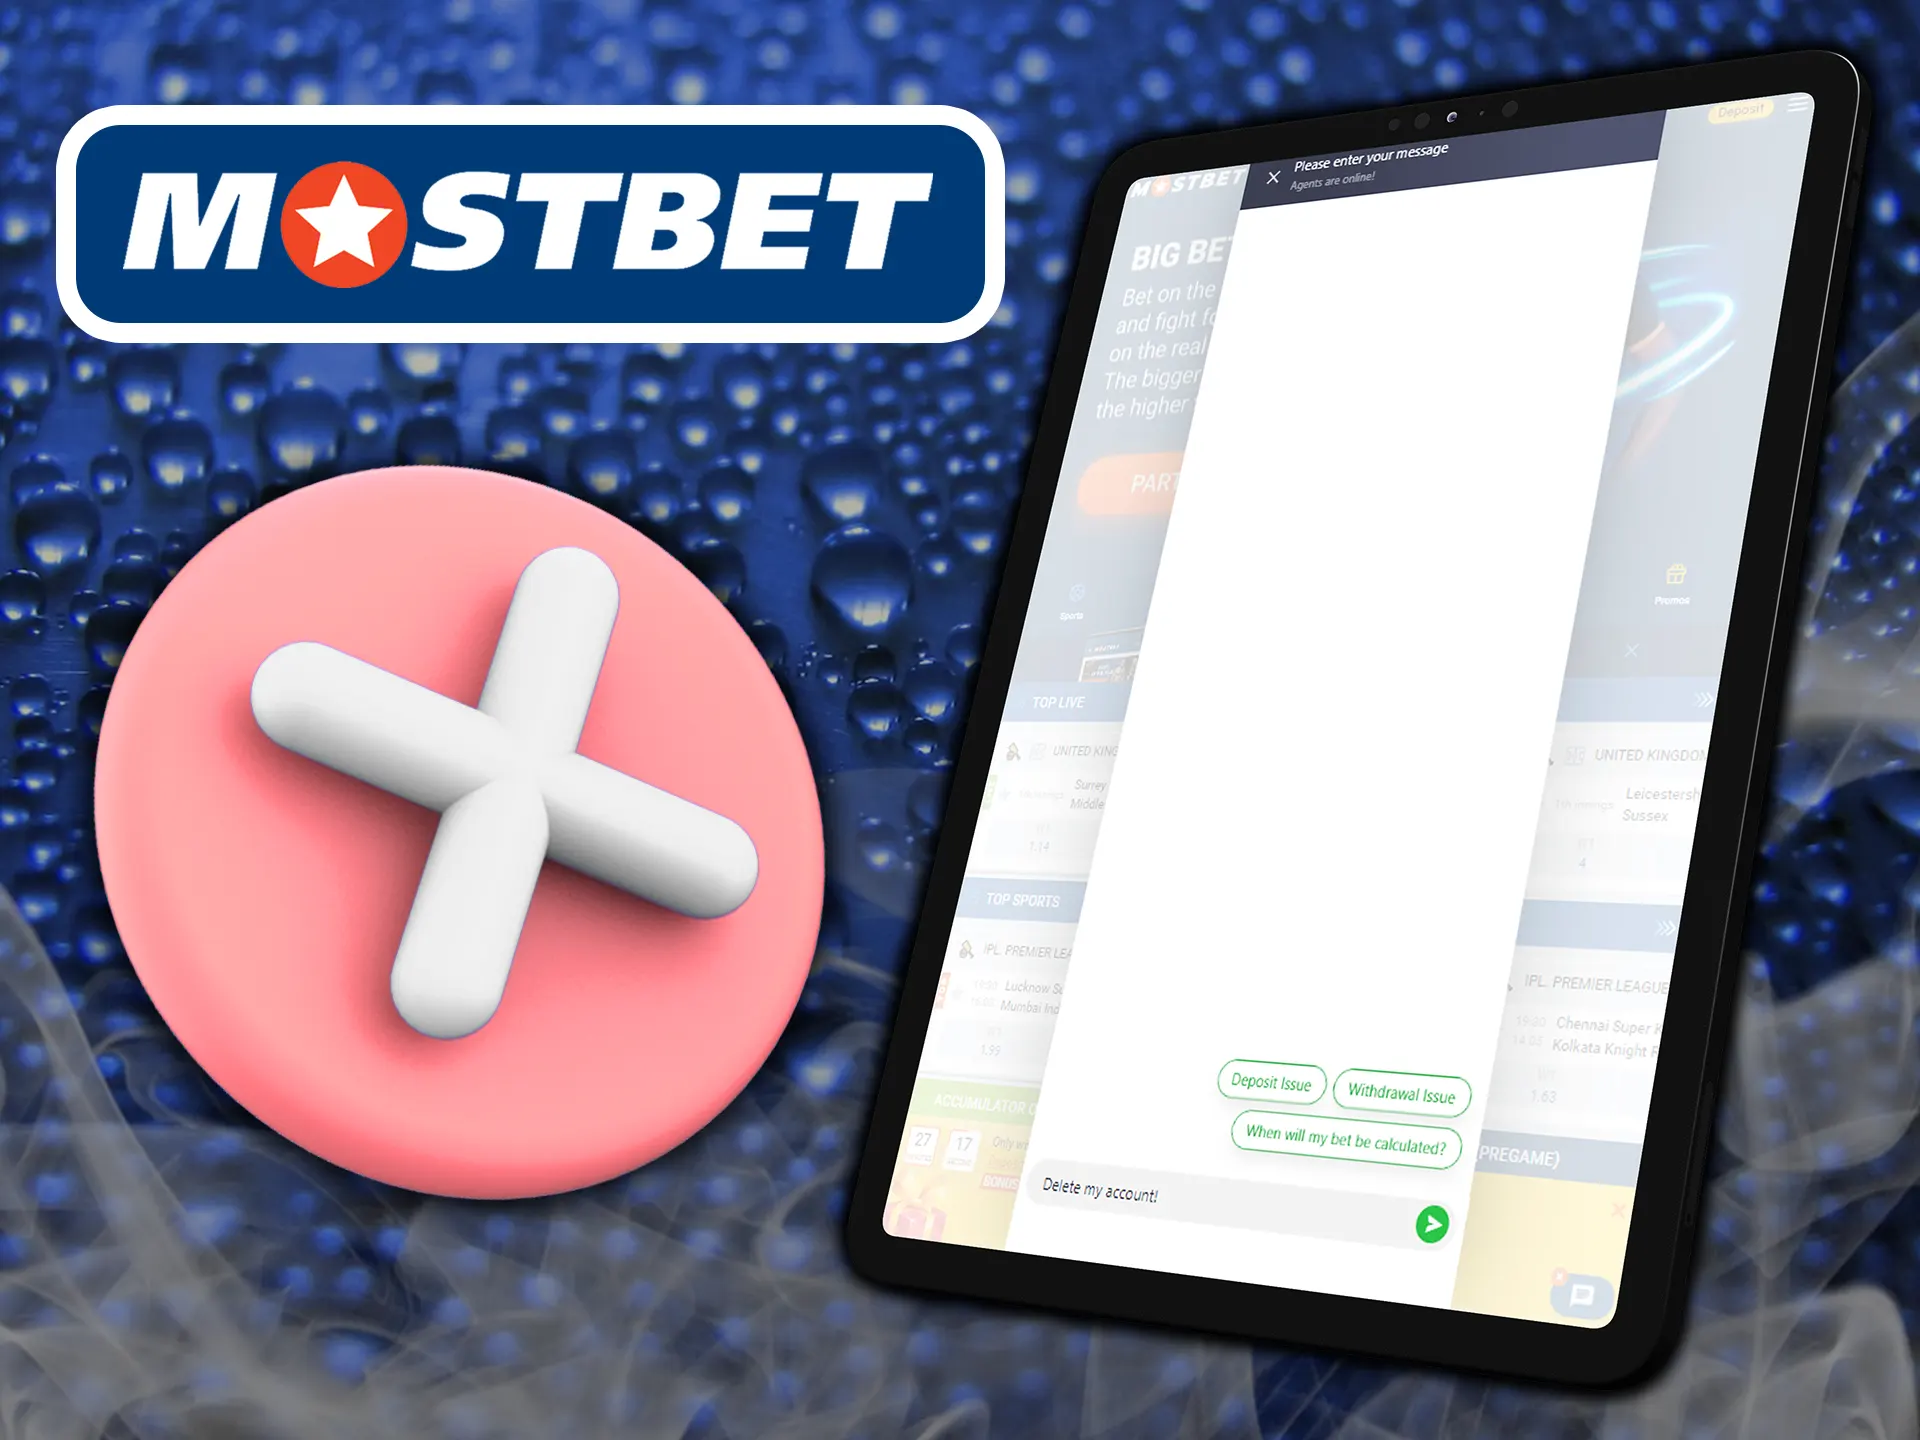 Learn how to delete your Mostbet account.